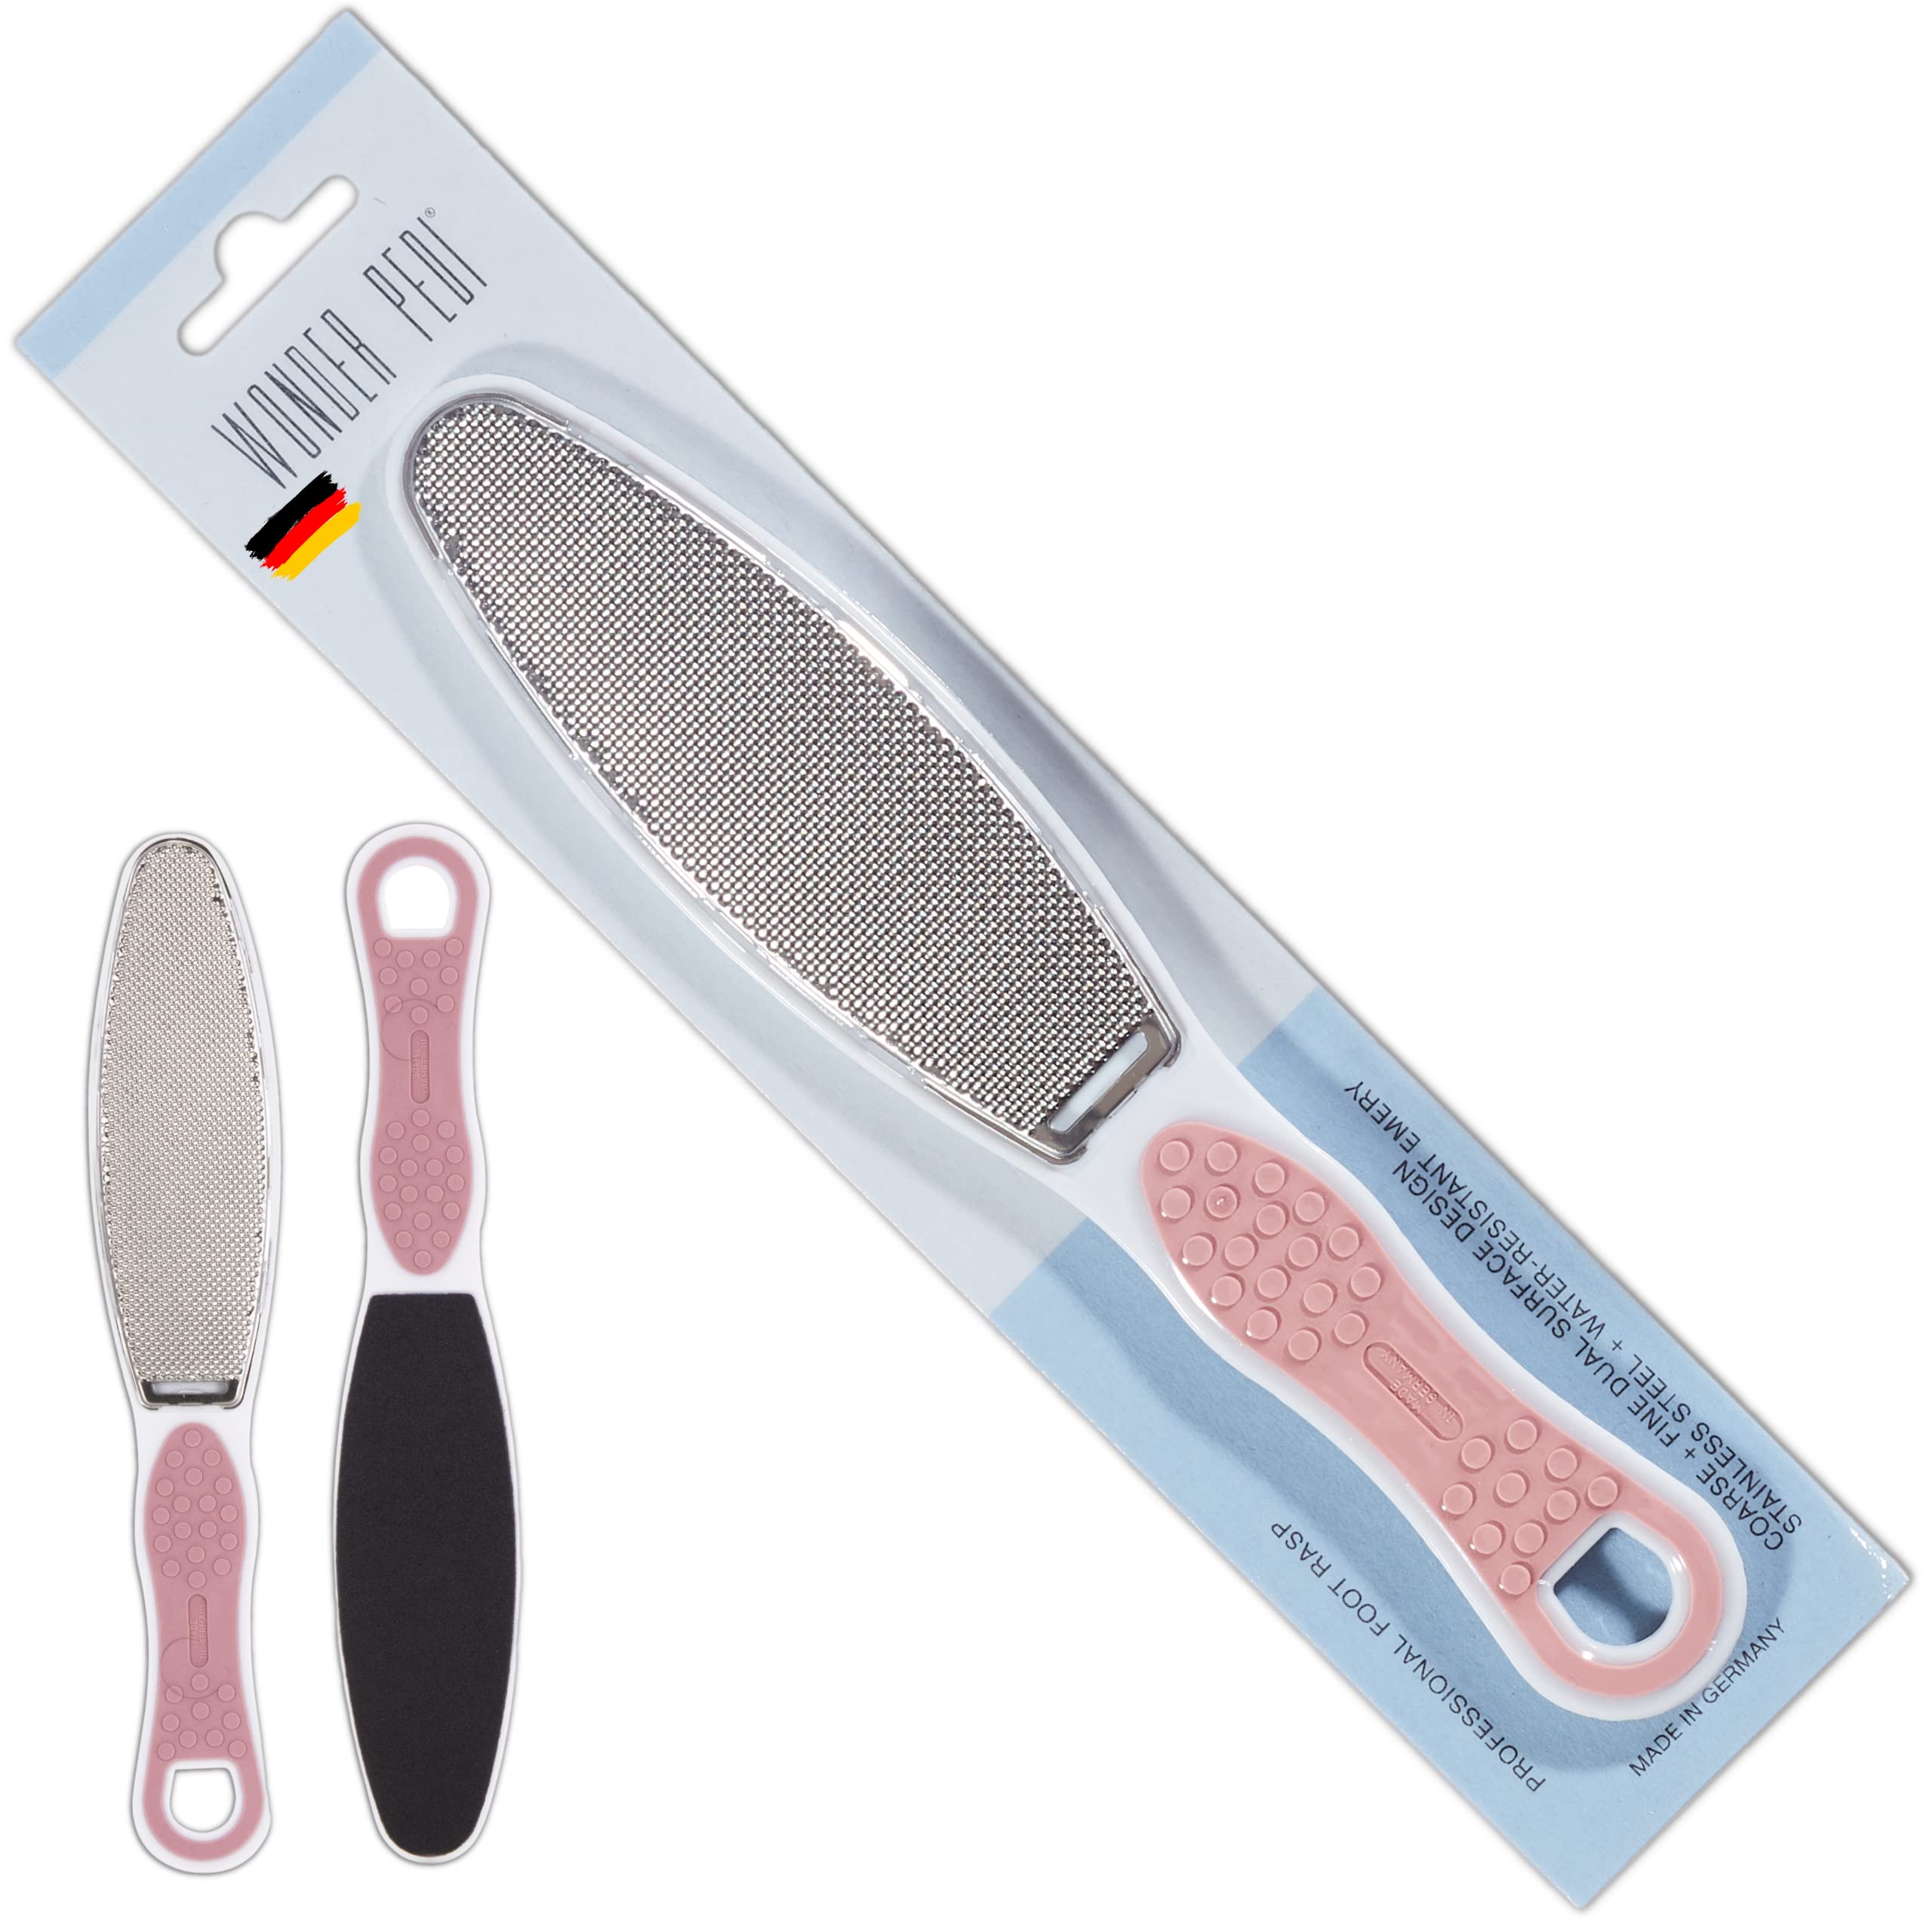 Foot File Callus Remover, Stainless Steel Foot Scrubber, Double Sided File  Cracked Heel Scraper - pink